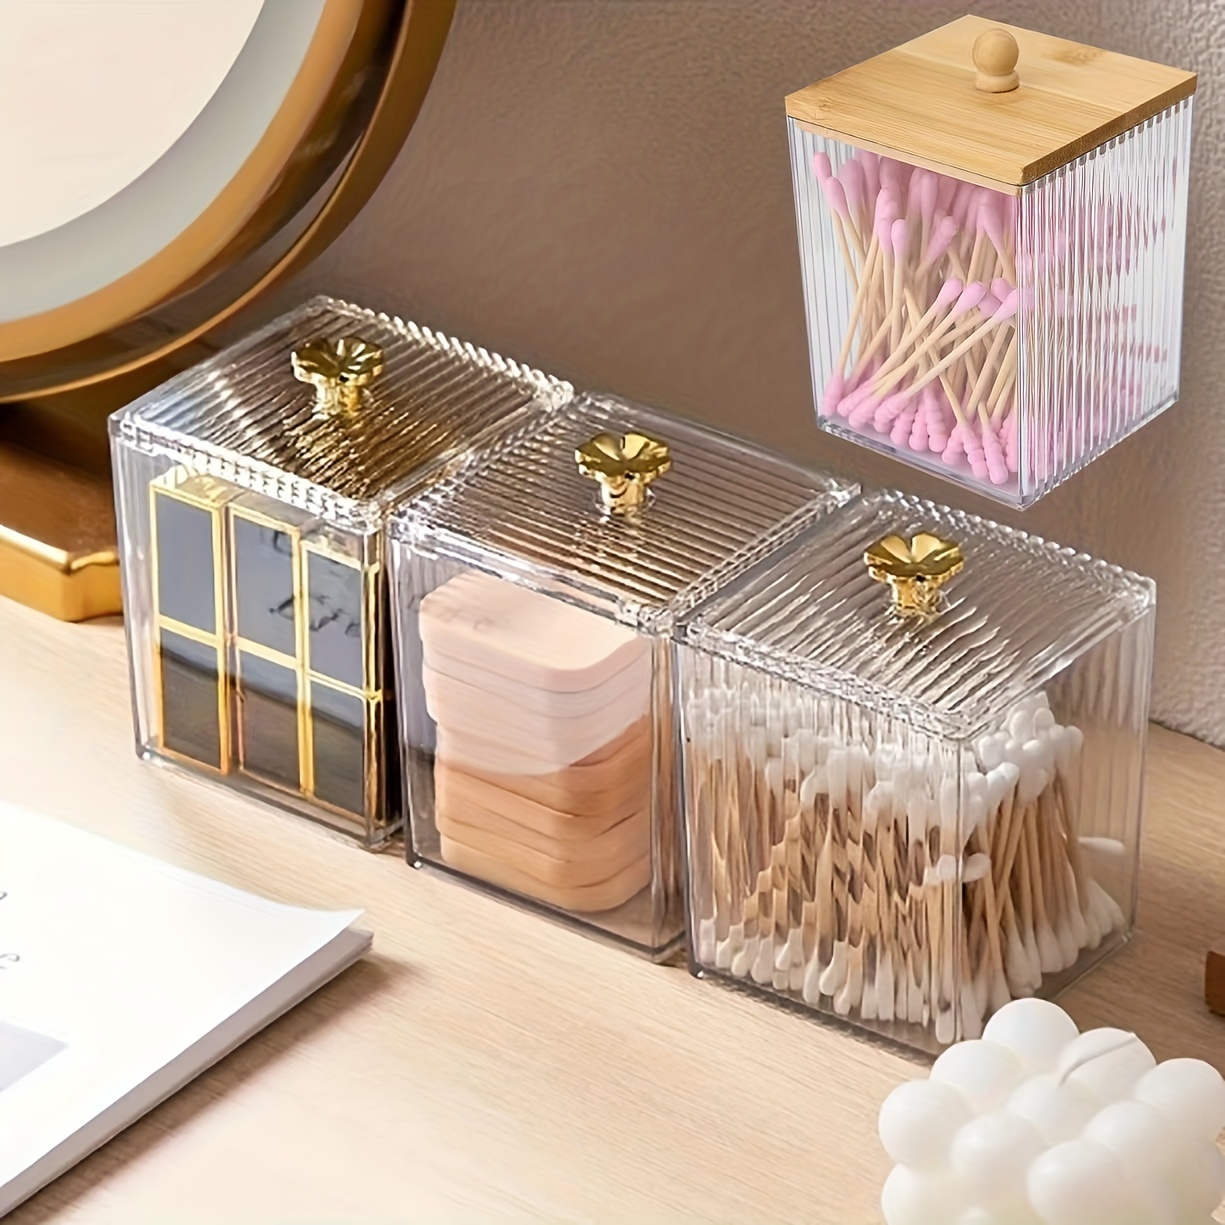 

Acrylic Cotton Swabs Holder With Lid - Organize Your Bathroom Vanity With Makeup Storage Canister Box For Ball, Swabs, Floss, Sponges, Jewelry, And More - Clear Rectangle